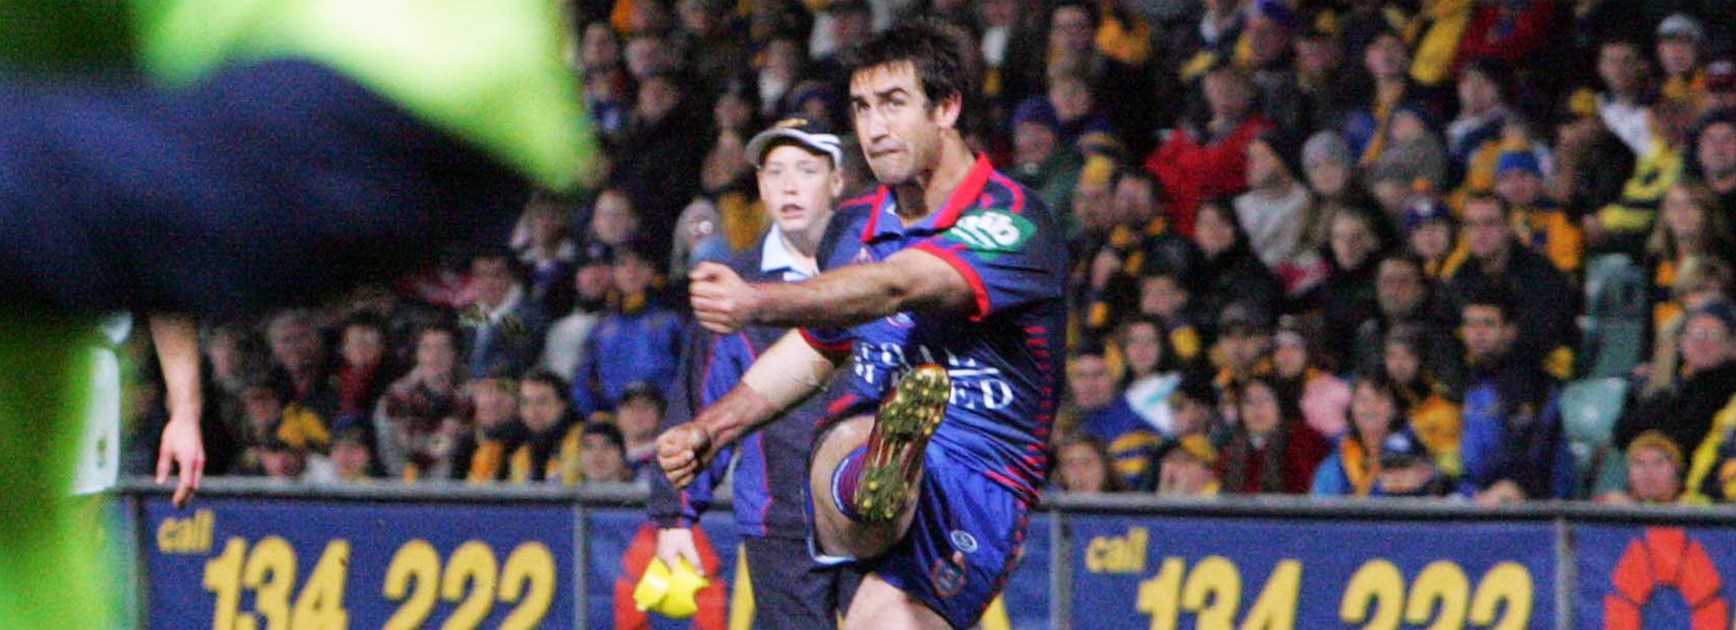 Andrew Johns will be back kicking goals - for charity - during the 2016 Downer NRL Auckland Nines weekend.